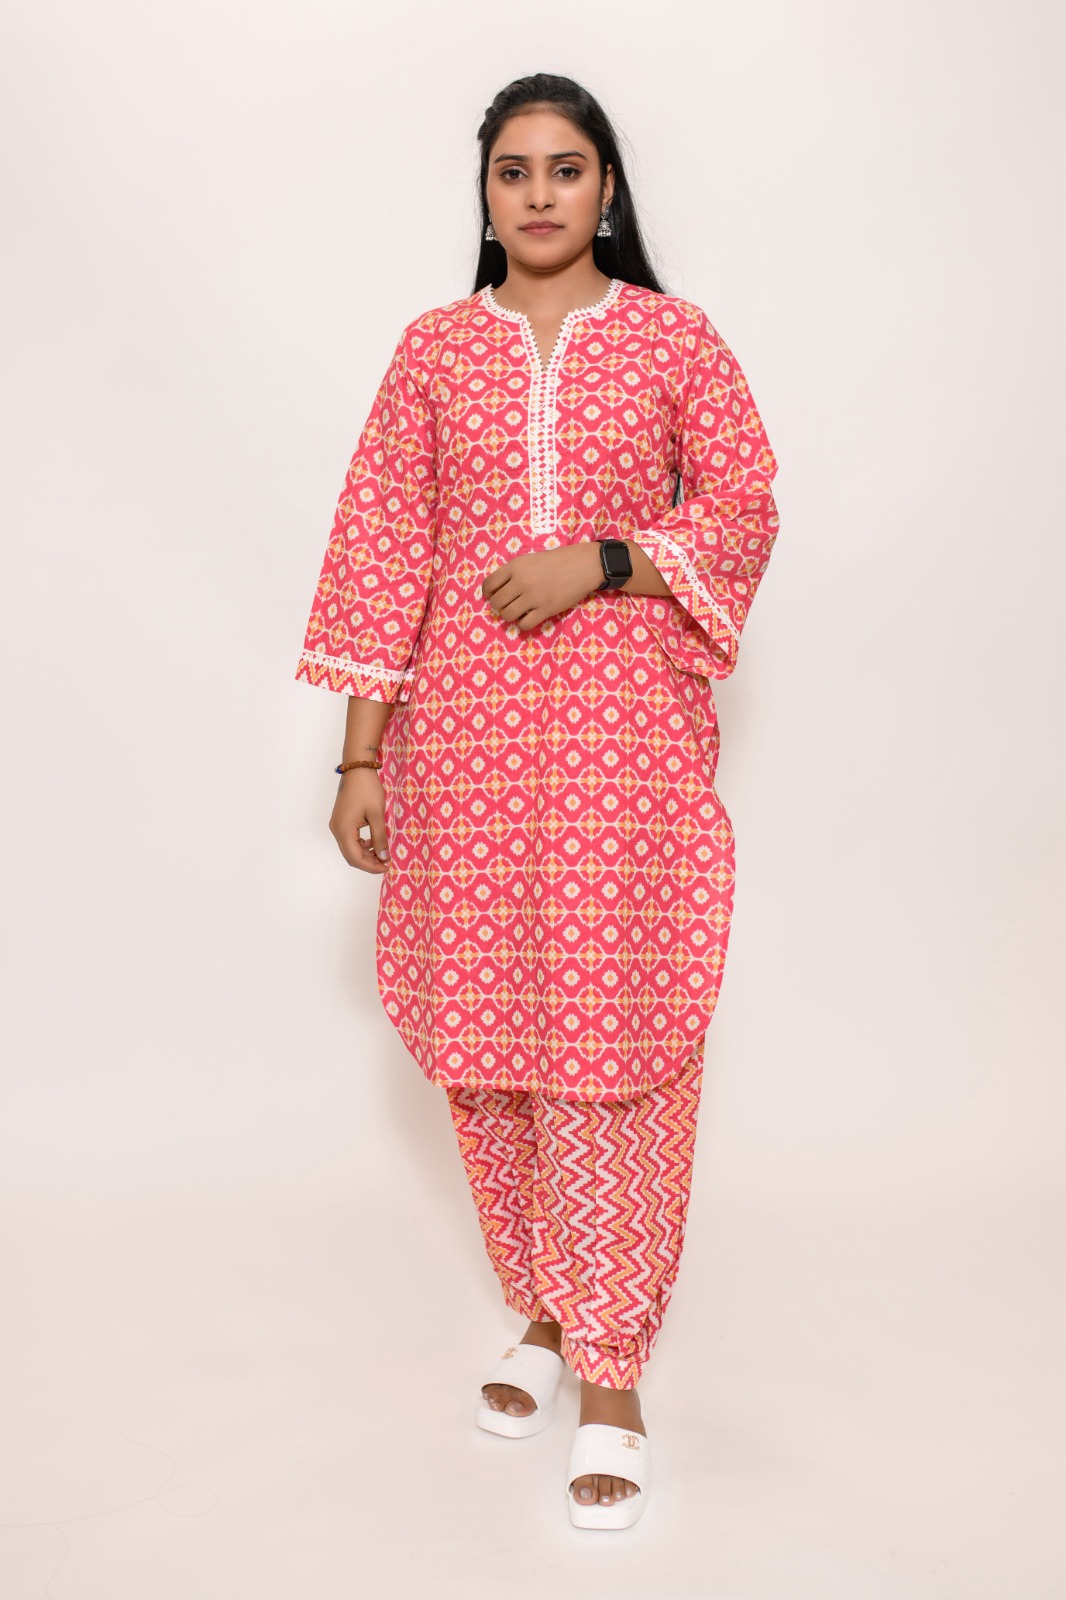 3 Piece Salwar - 100% Cotton pink salwar with white prints.White and p